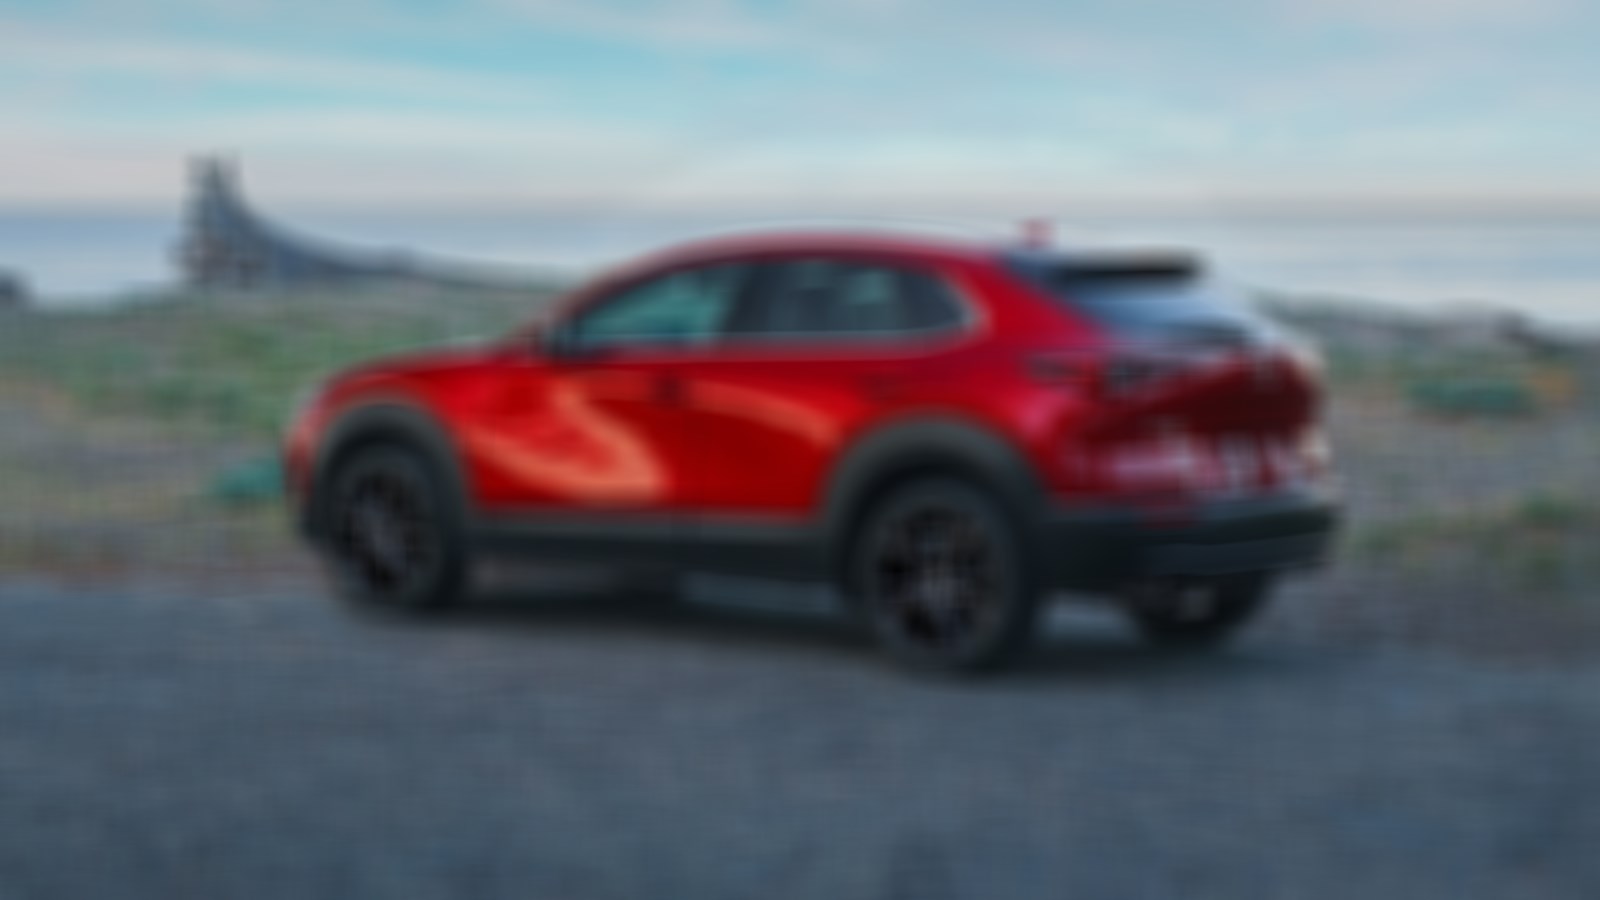 Soul Red Crystal Metallic Mazda CX-30 Crossover SUV parked on gravel road overlooking a vast lake.